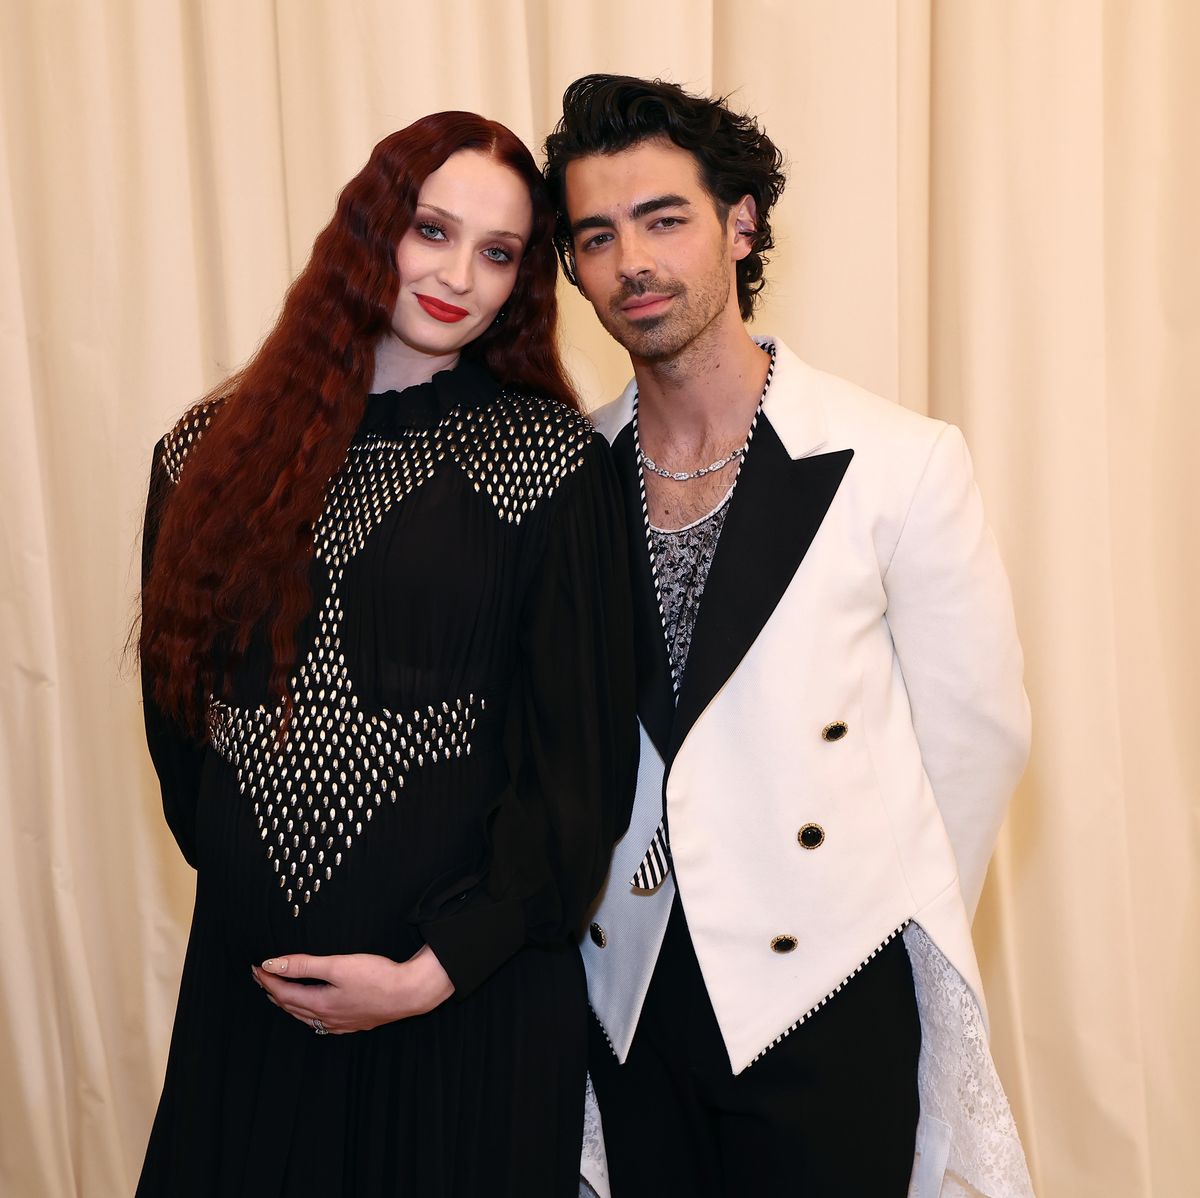 Sophie Turner Shows Post-Baby Body 3 Months After Daughter's Birth